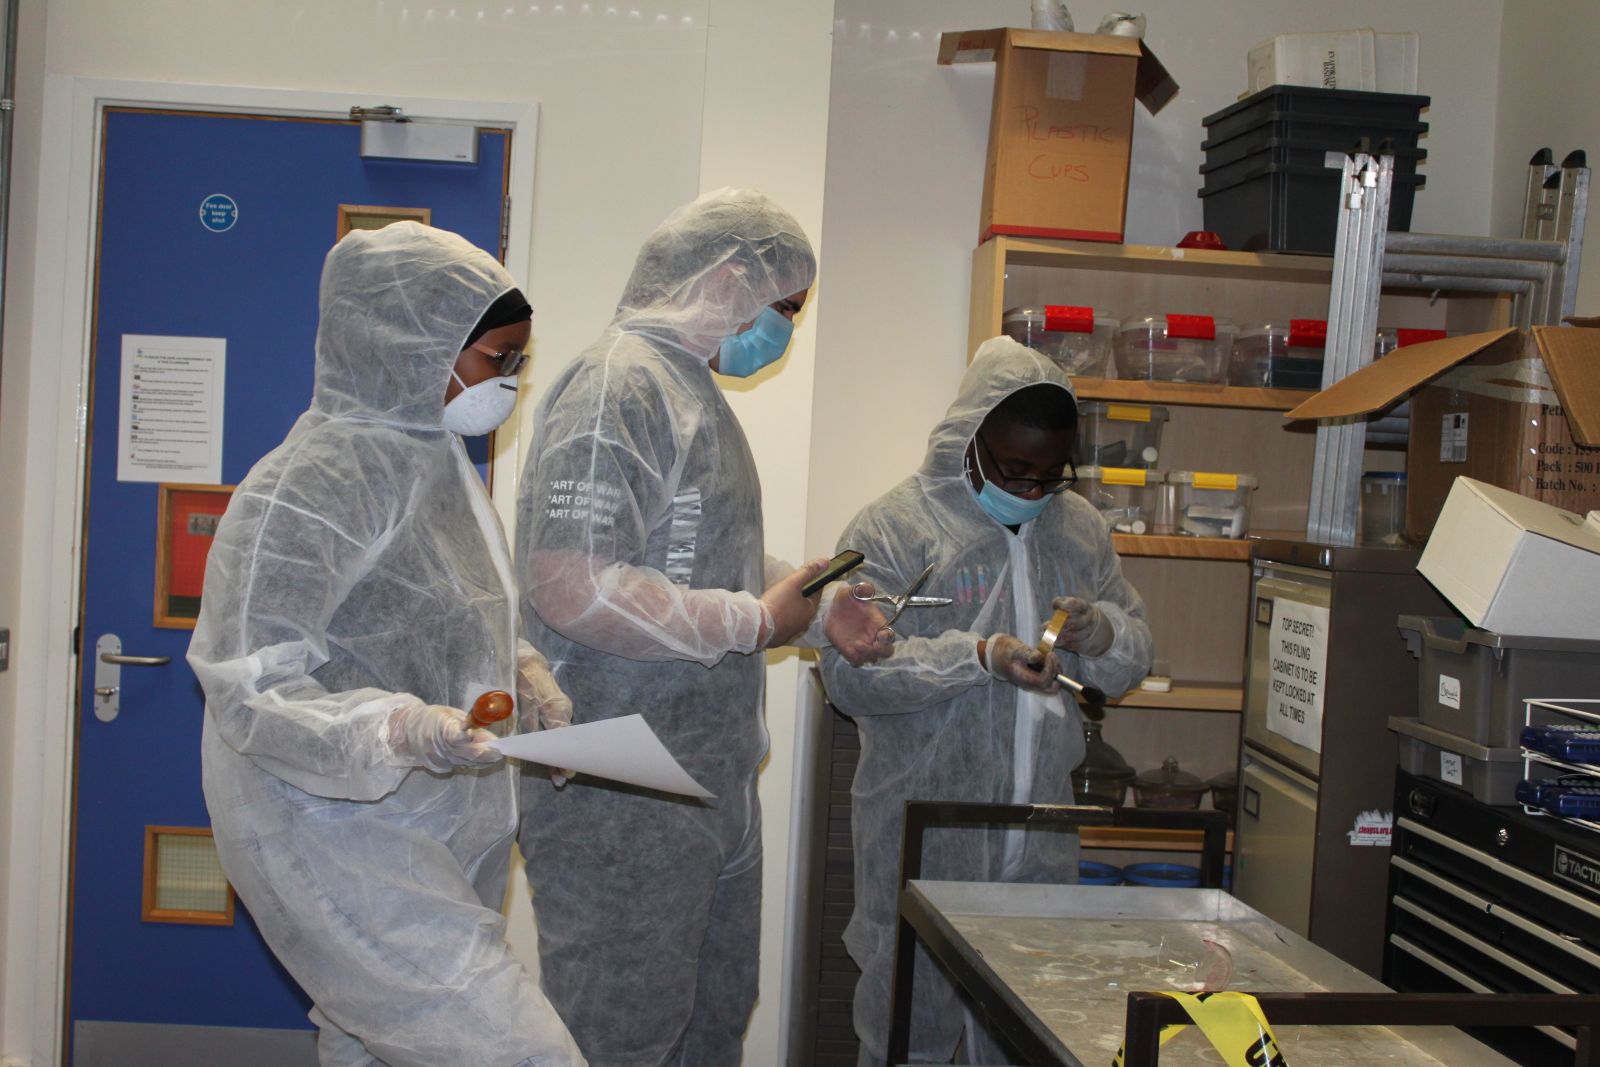 Applied Science students at John Ruskin College investigate a mock crime scene